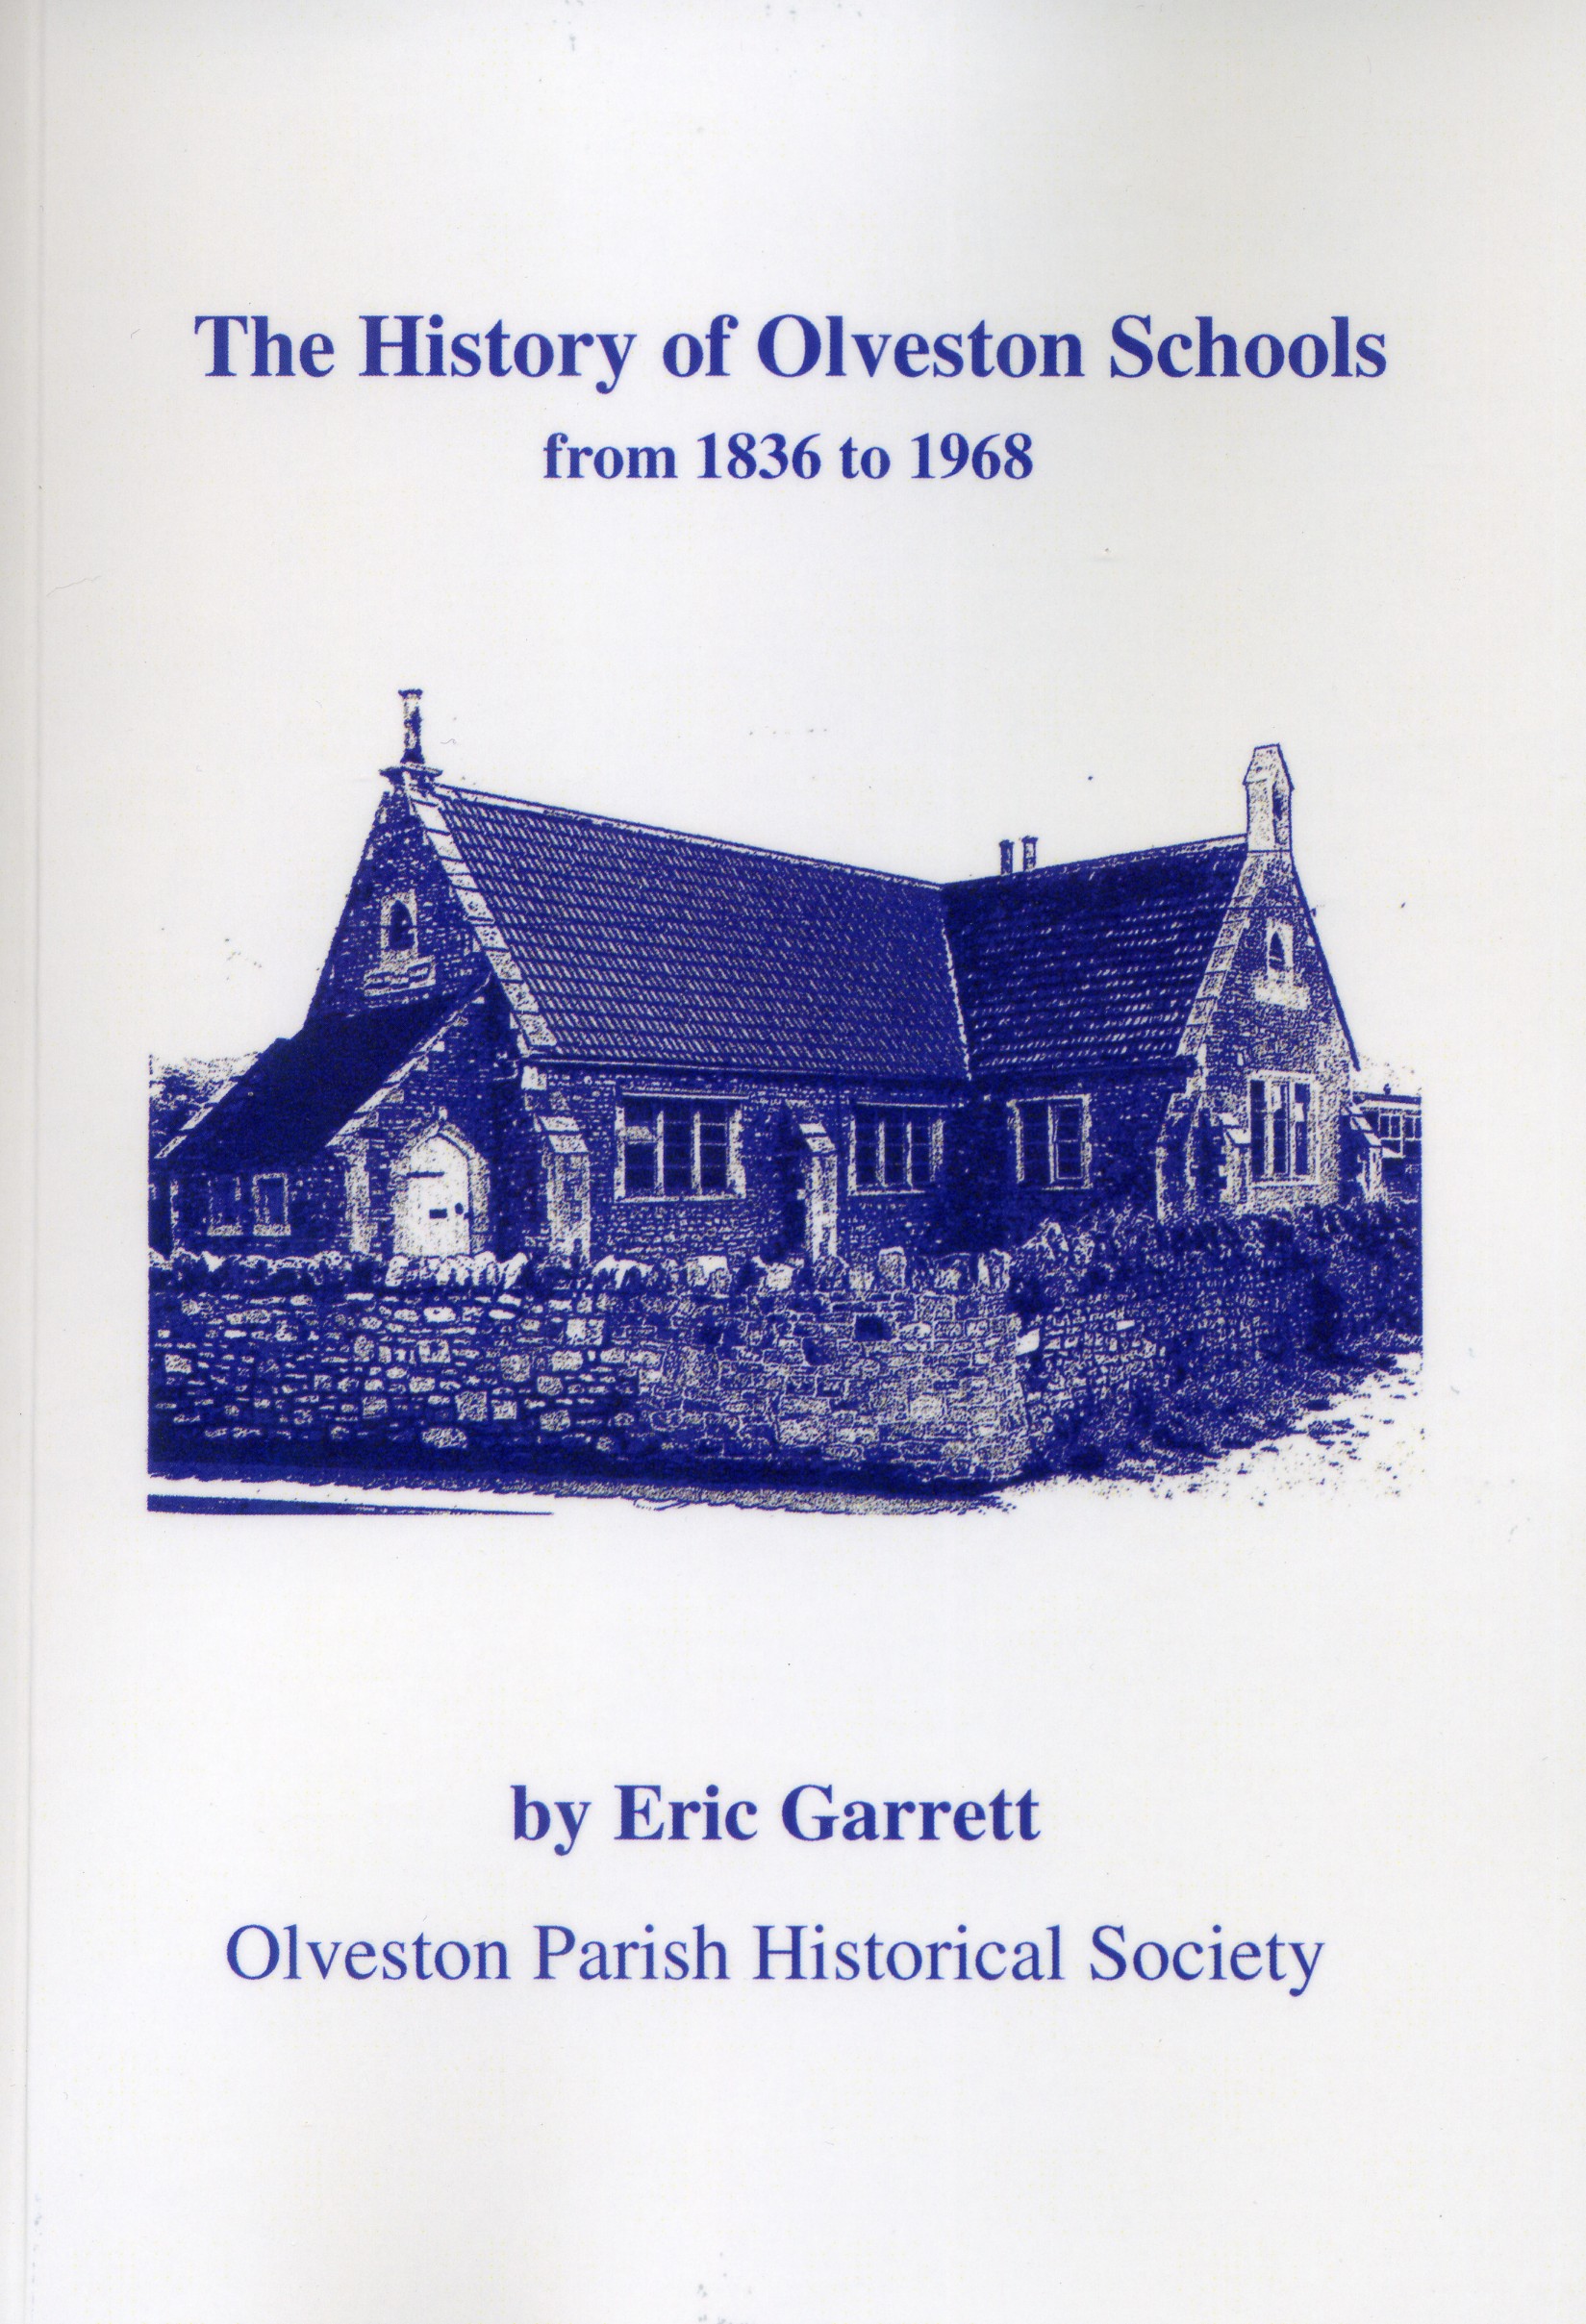 Book cover- The History of Olveston Schools 1836-1968